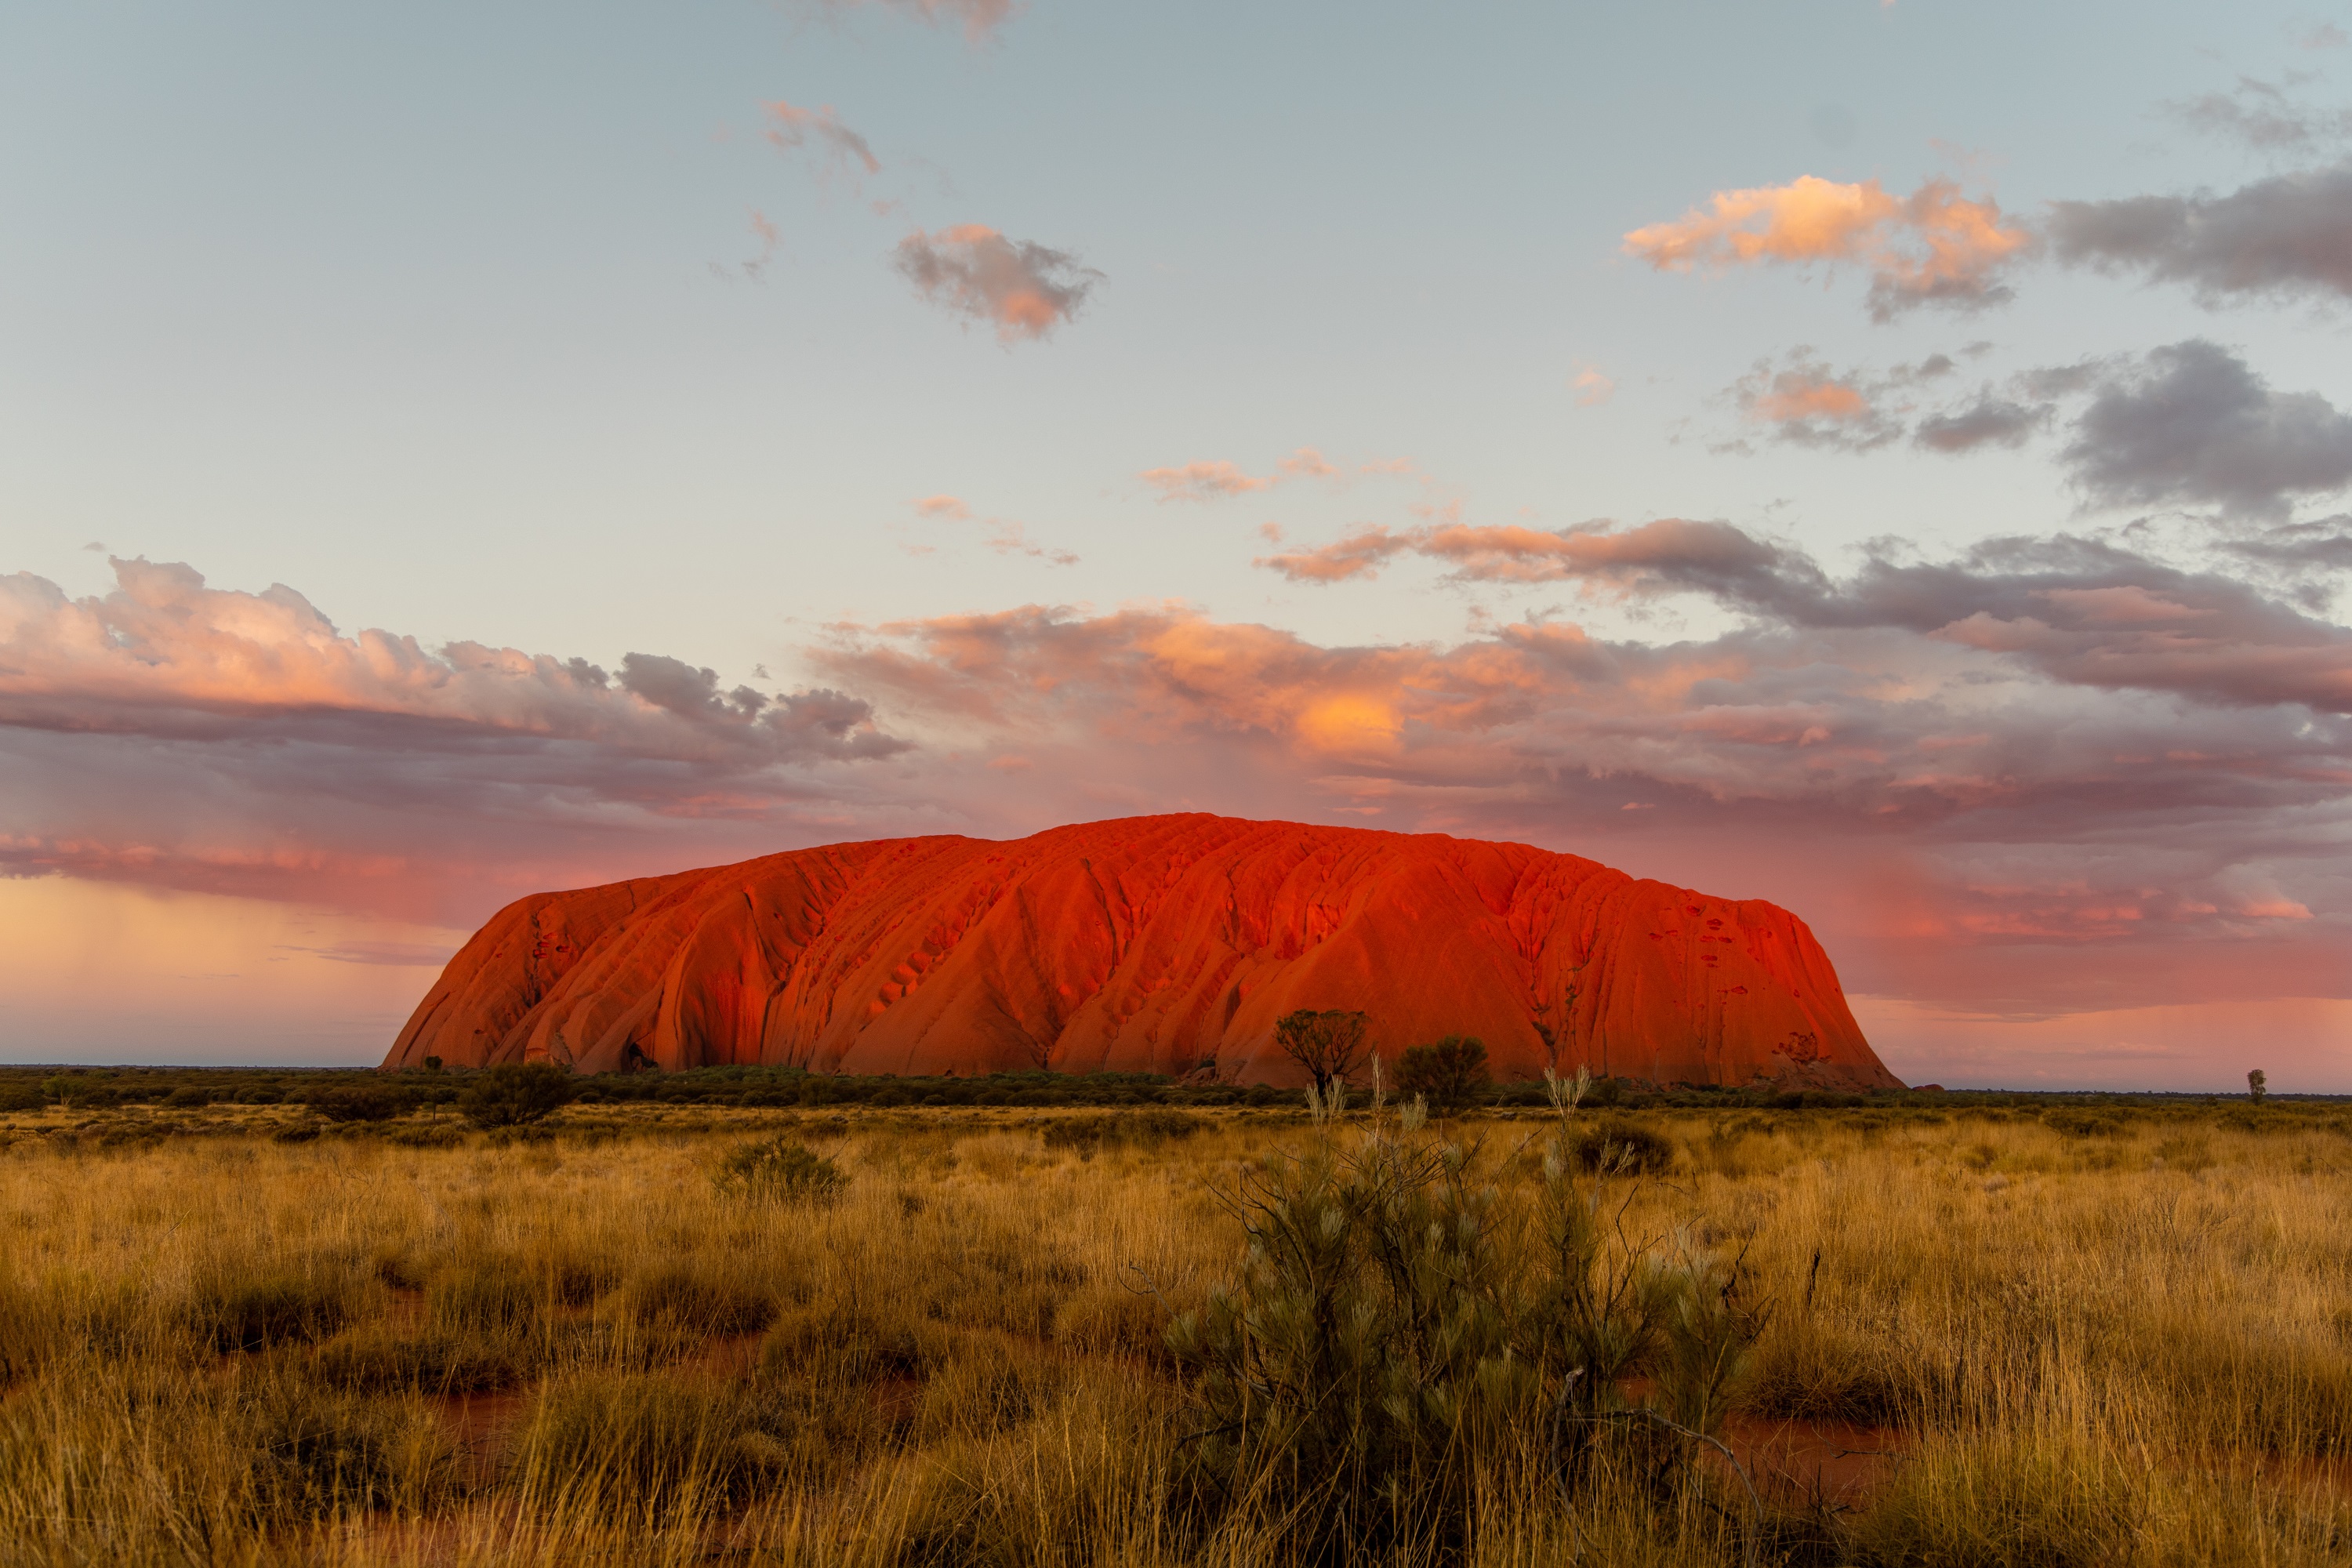  4-Day Red Centre to West MacDonnell from Alice Springs(Safari Tent): Uluru | Kata Tjuta | Kings Canyon | West MacDonnell Ranges | Standley Chasm | 